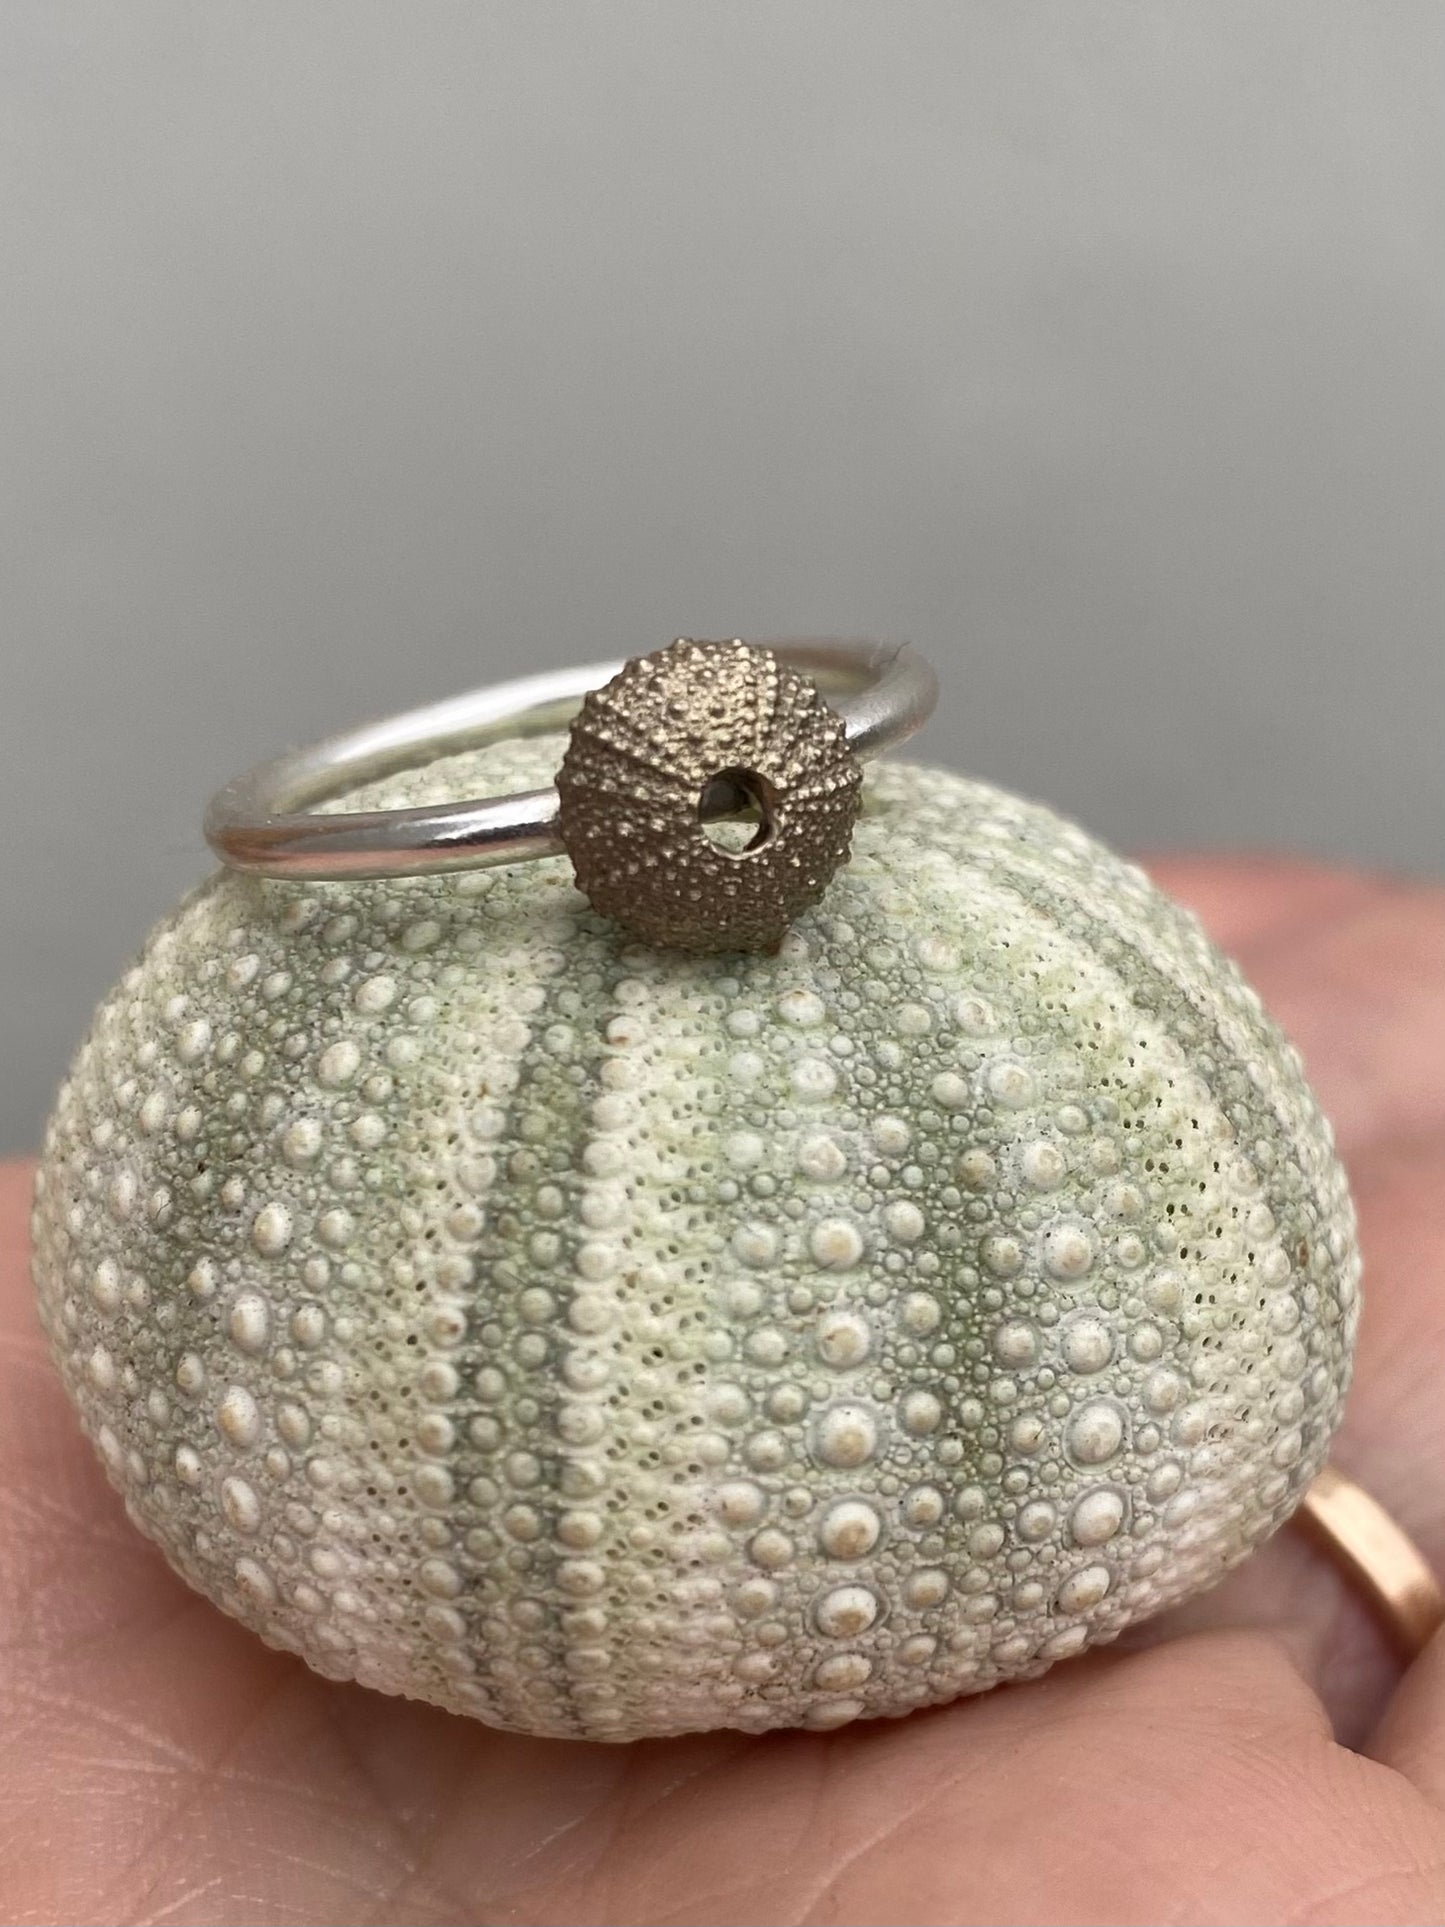 Small sea urchin shell adorned with a matching sterling silver sea urchin ring